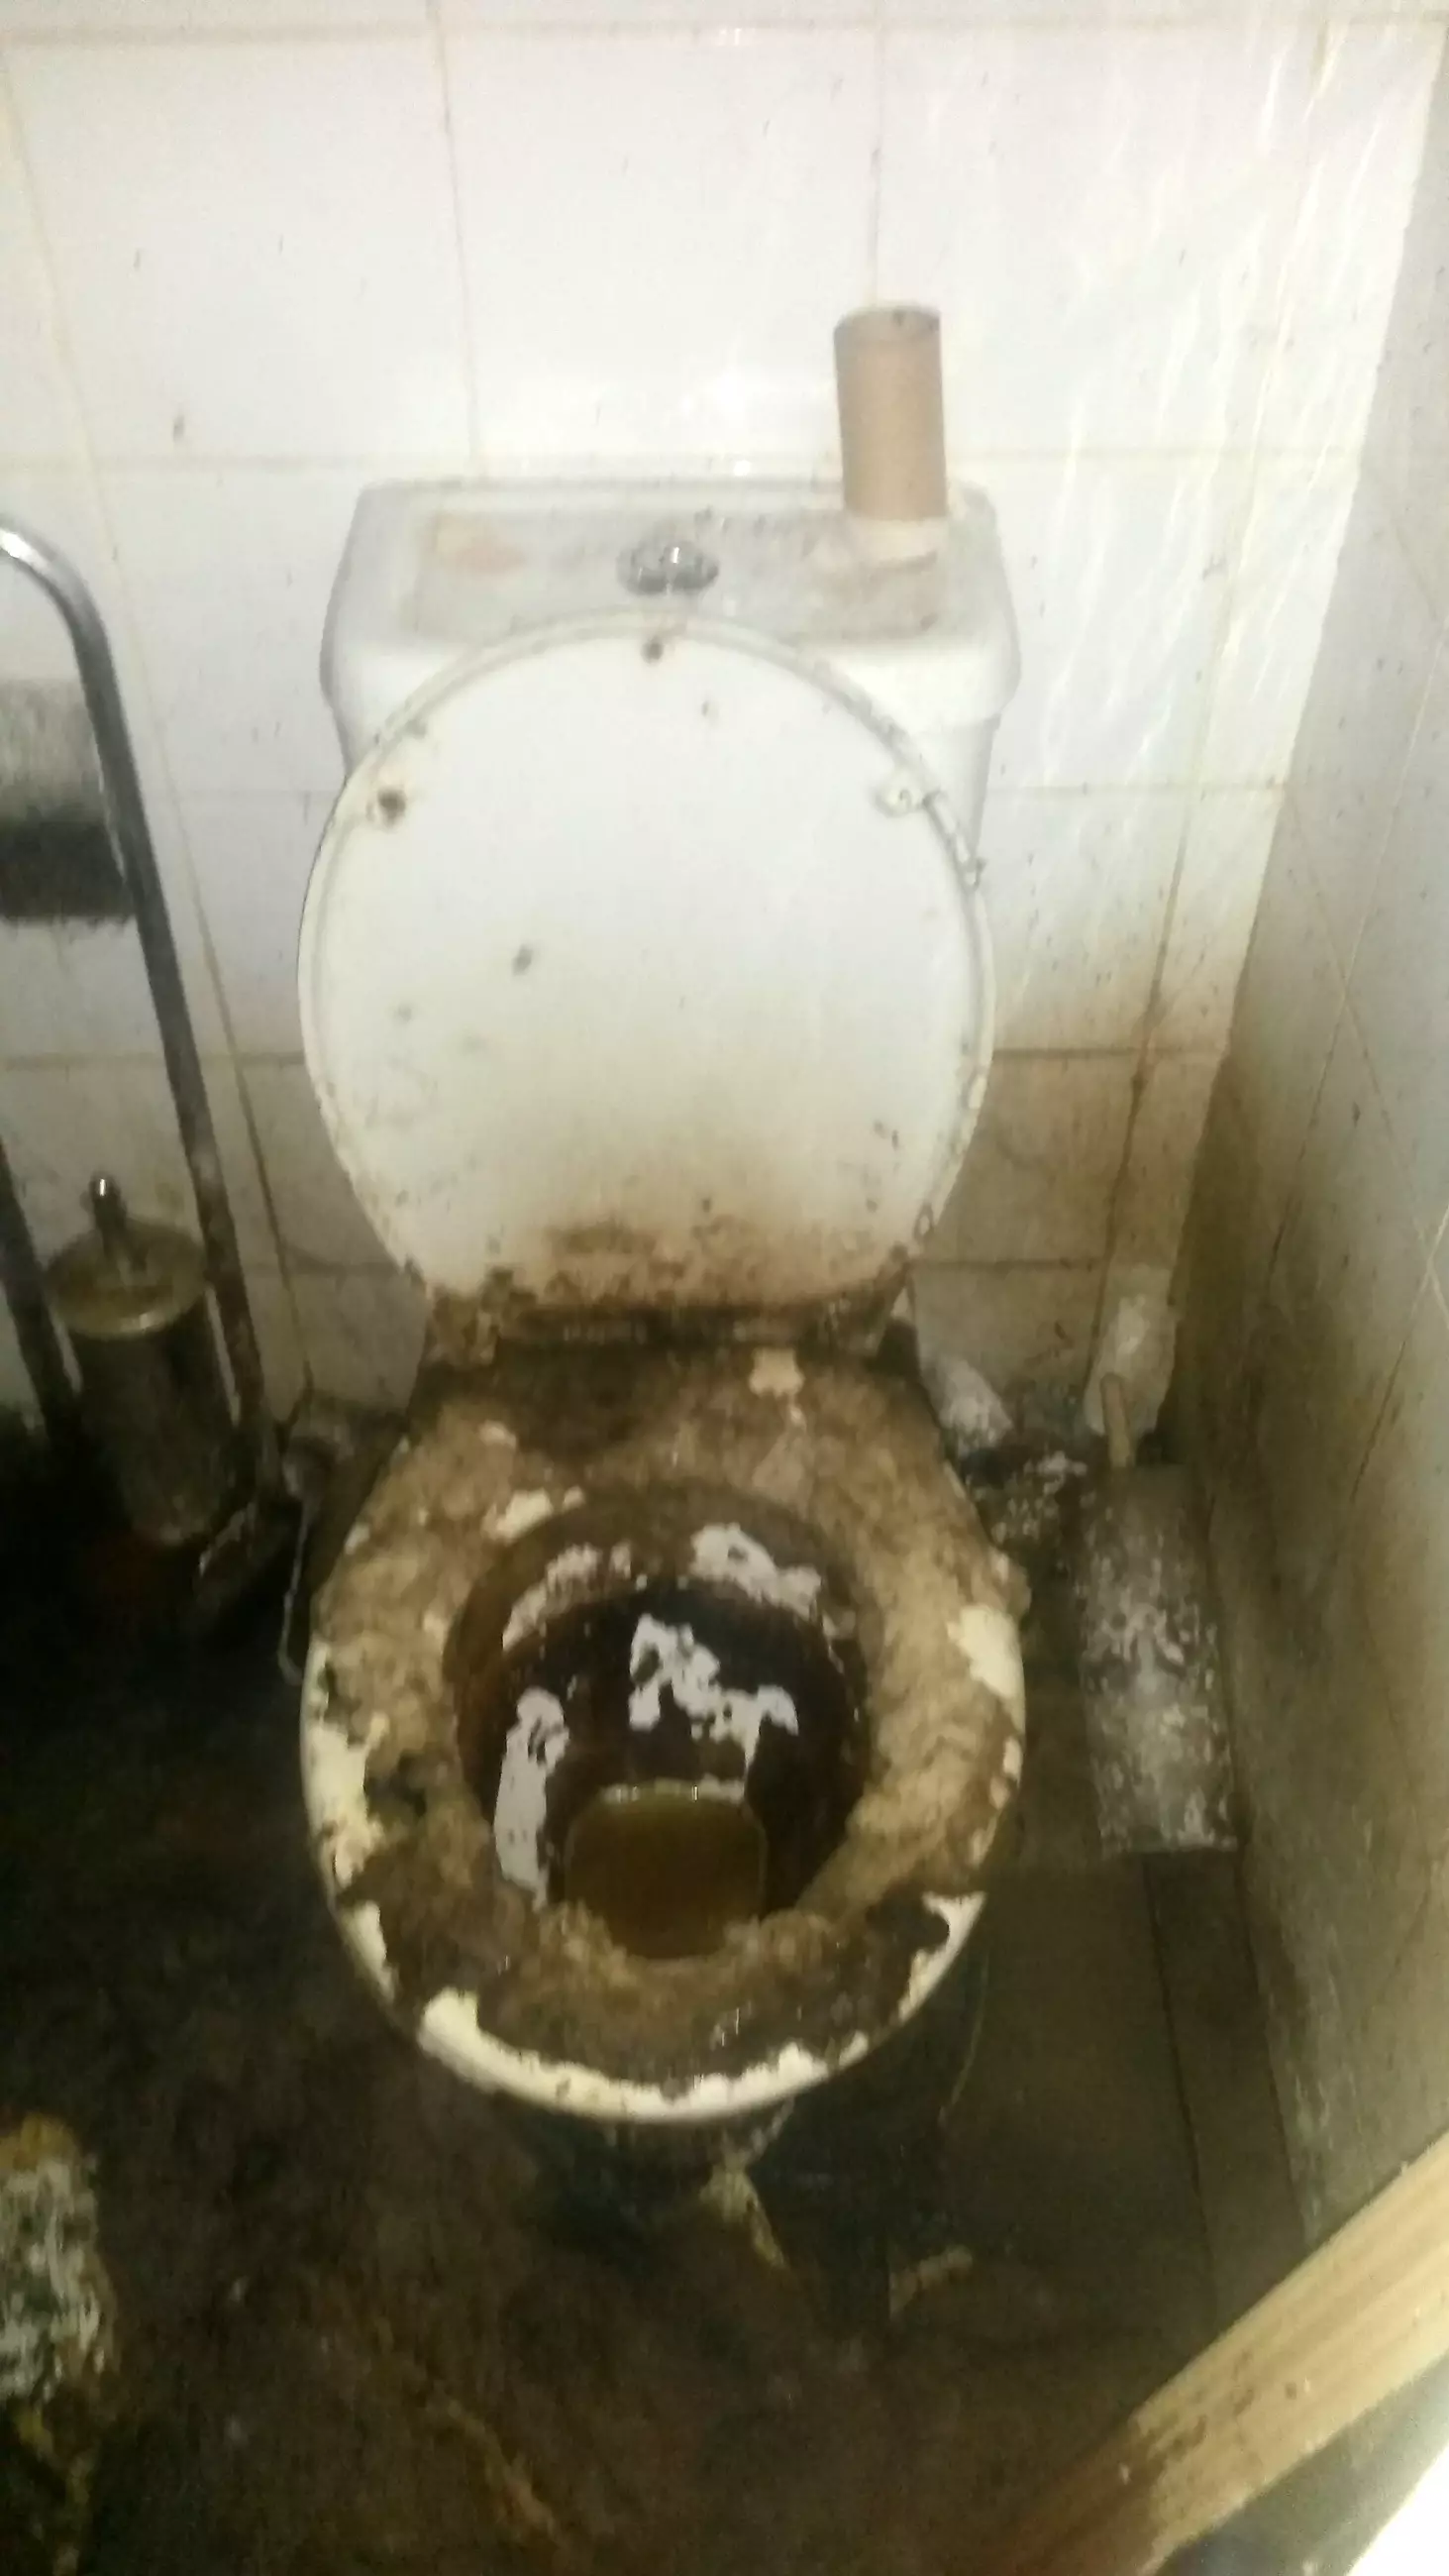 This toilet has definitely been used.